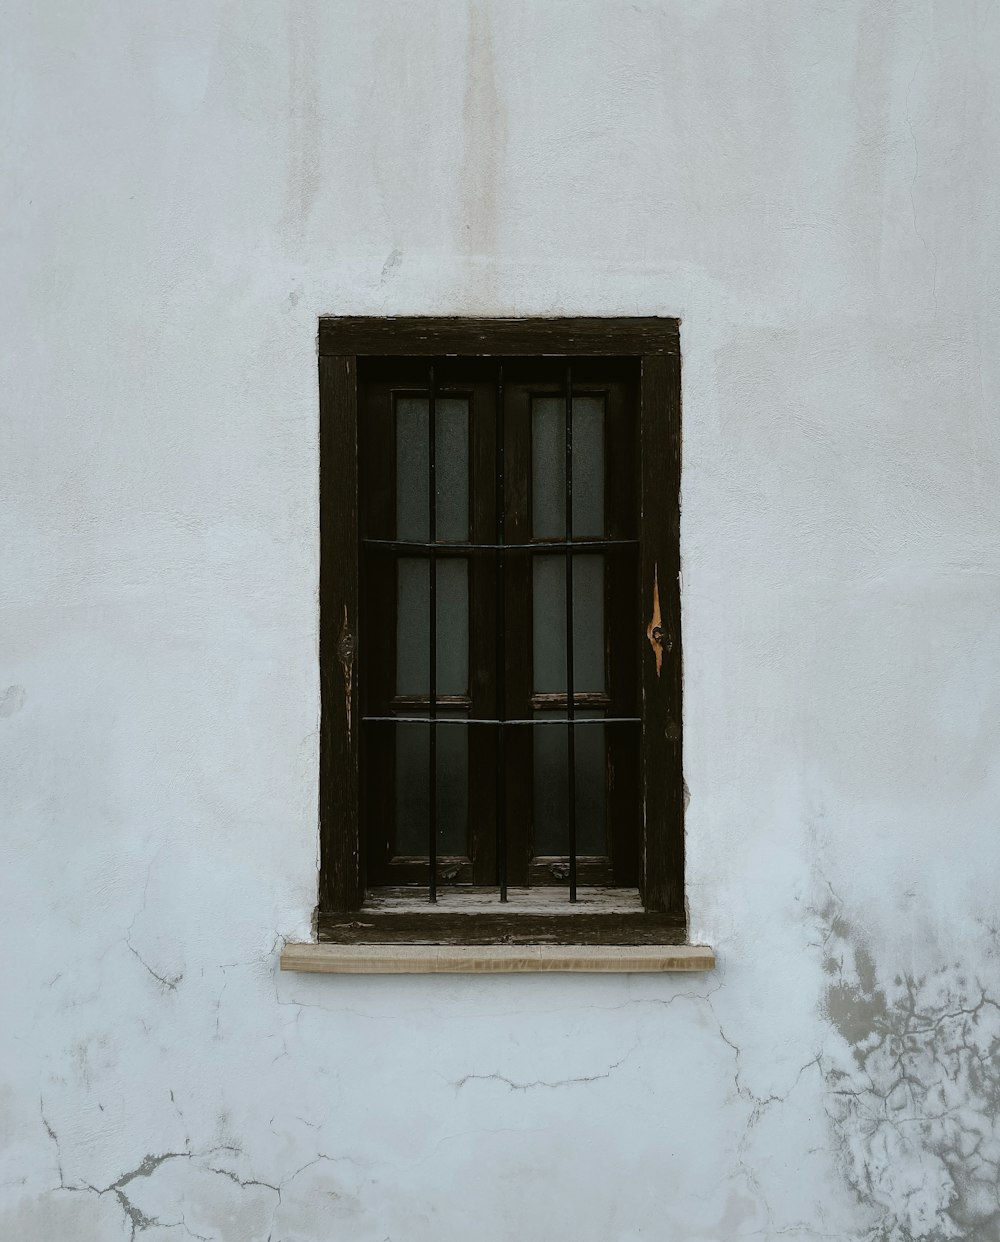 a window with bars on the side of a building